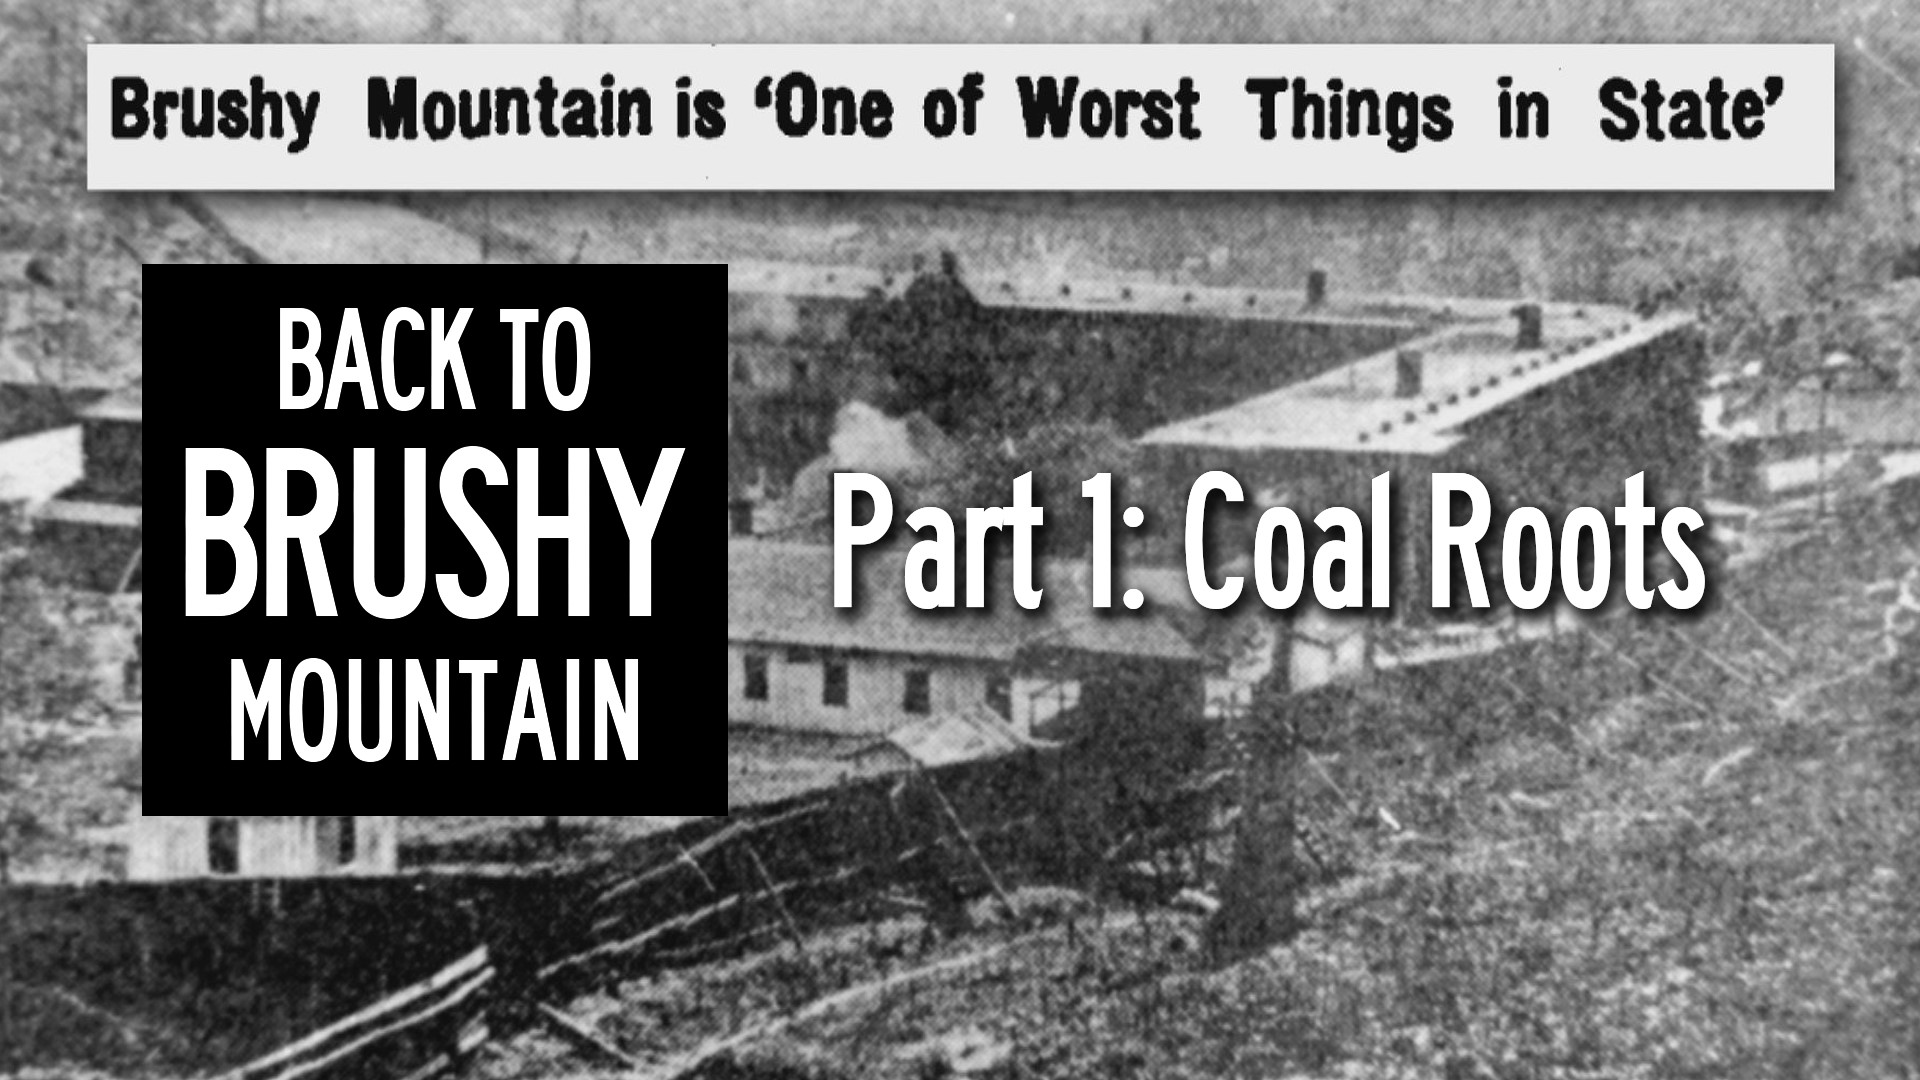 (Video, May 7, 2018) Part 1 of Back to Brushy Mountain examines the prison's origins as a deadly convict coal mining operation.